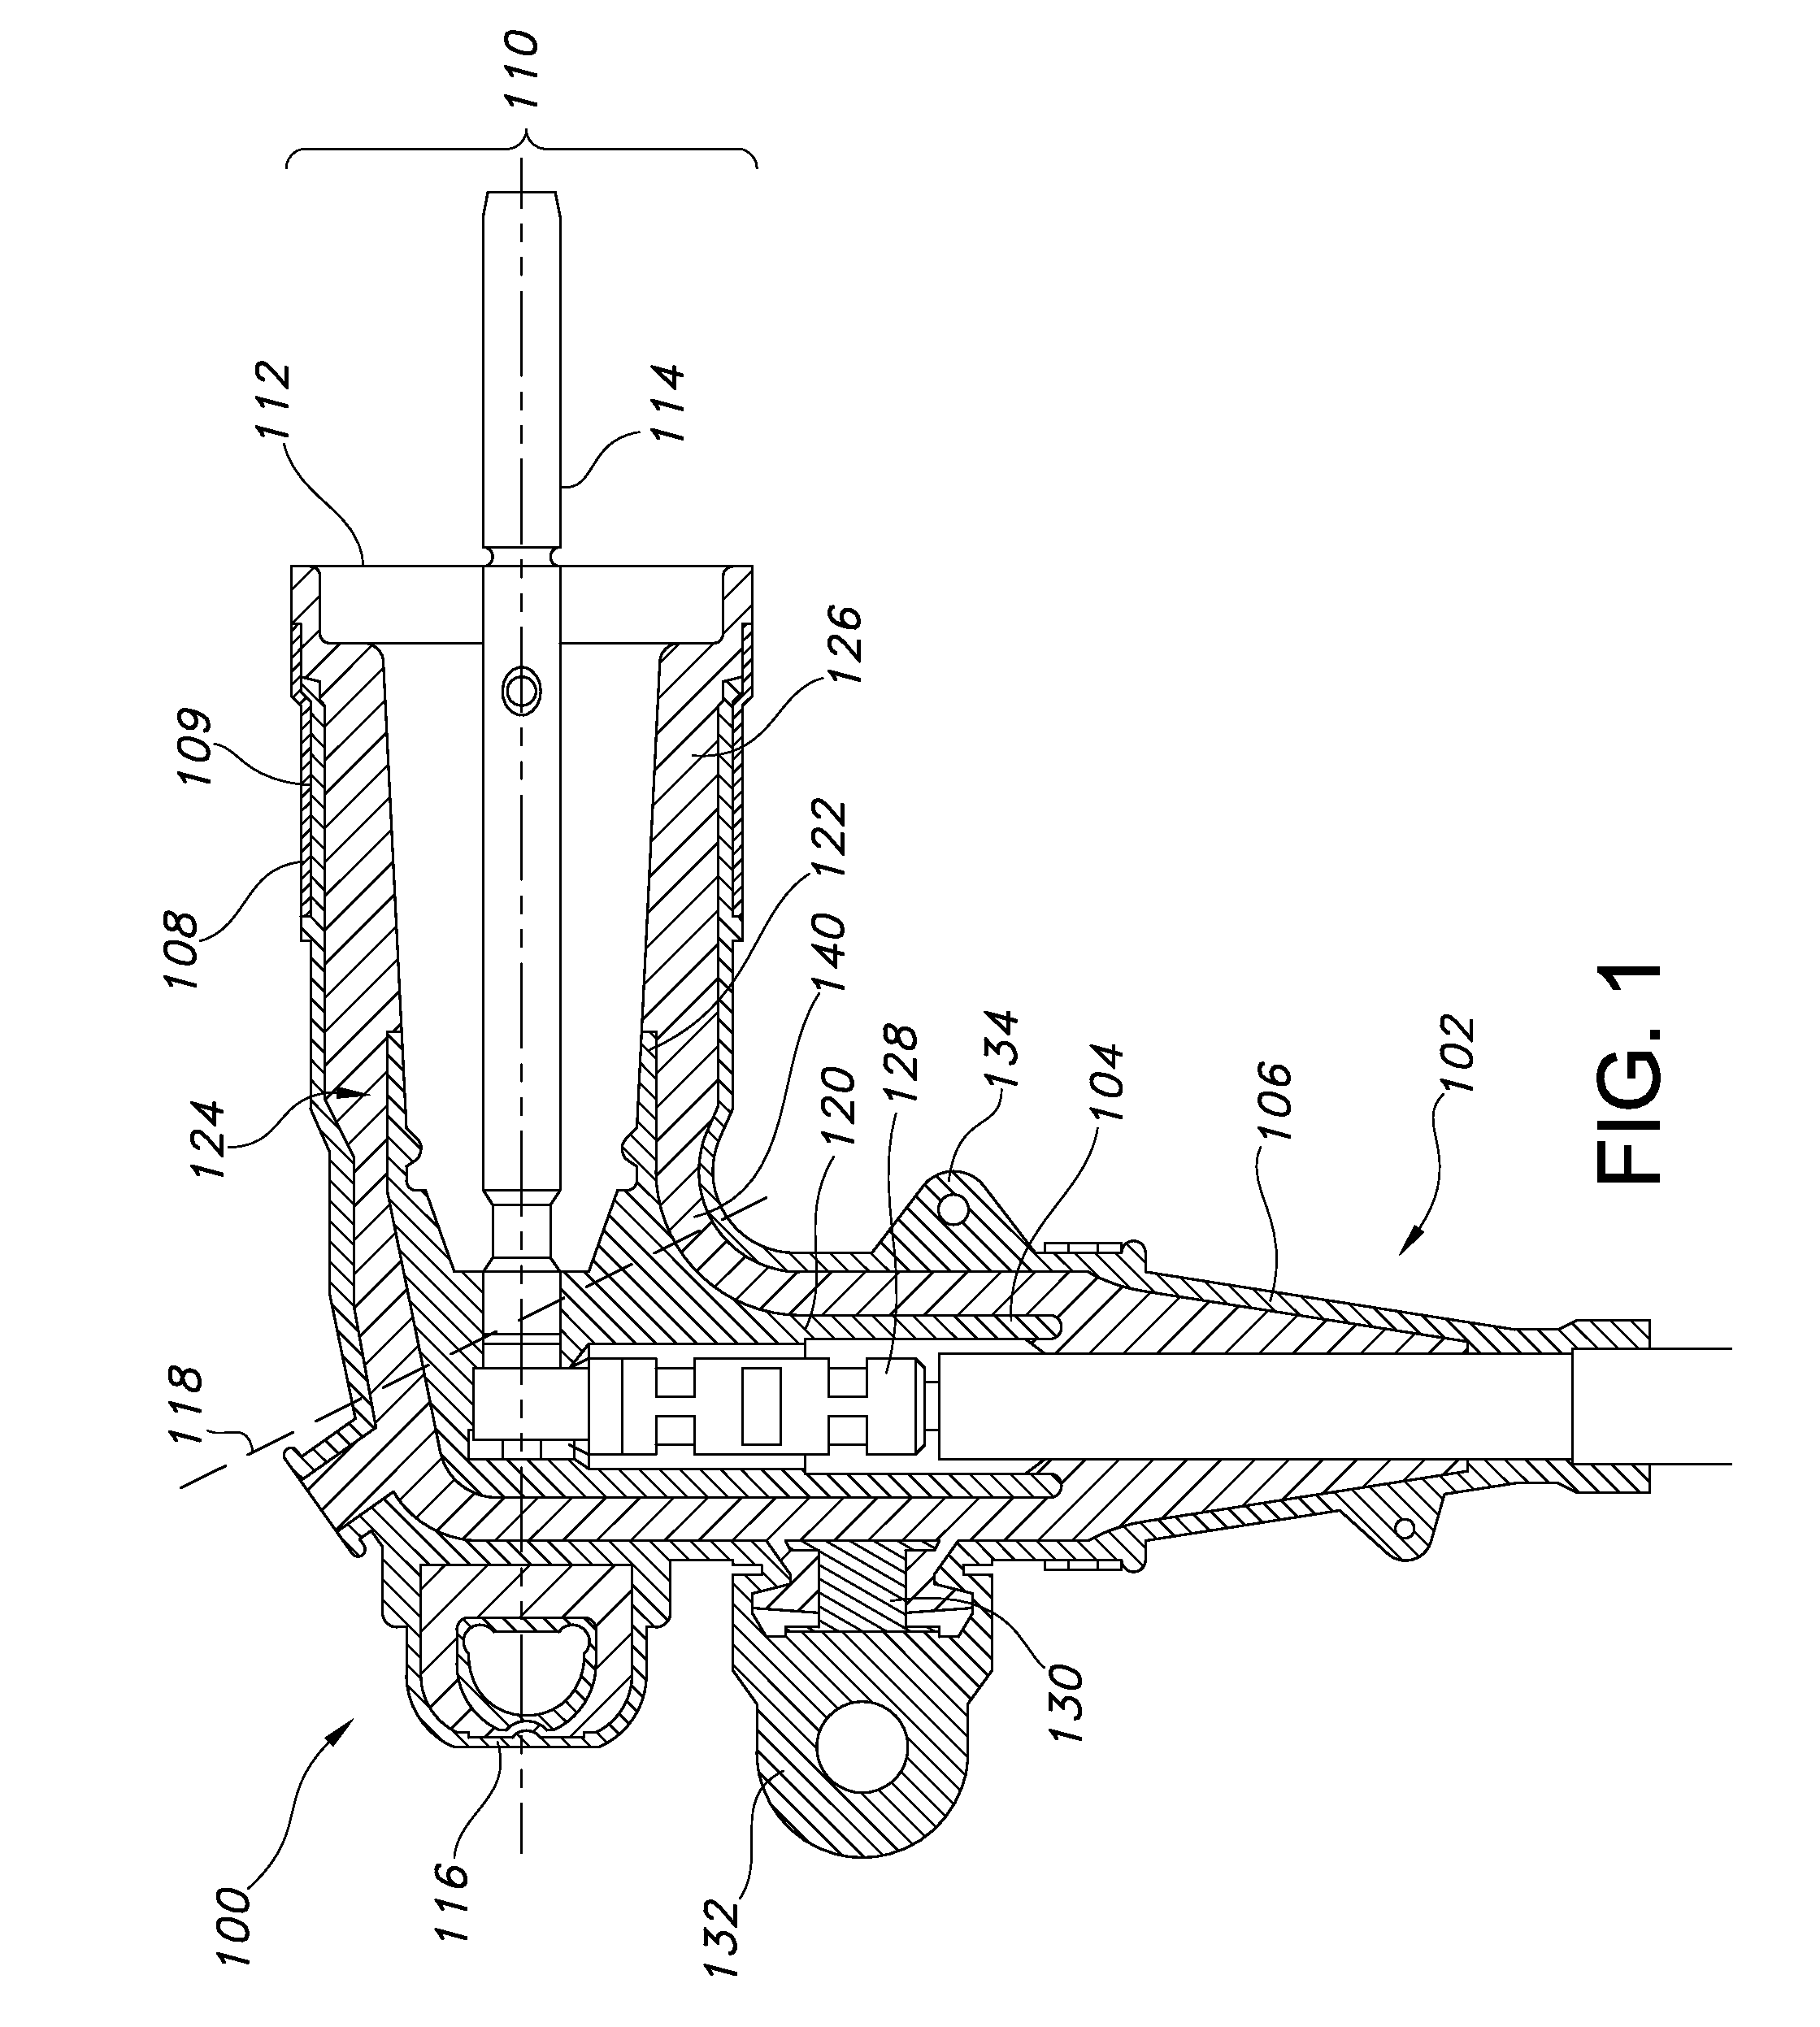 Two-material separable insulated connector